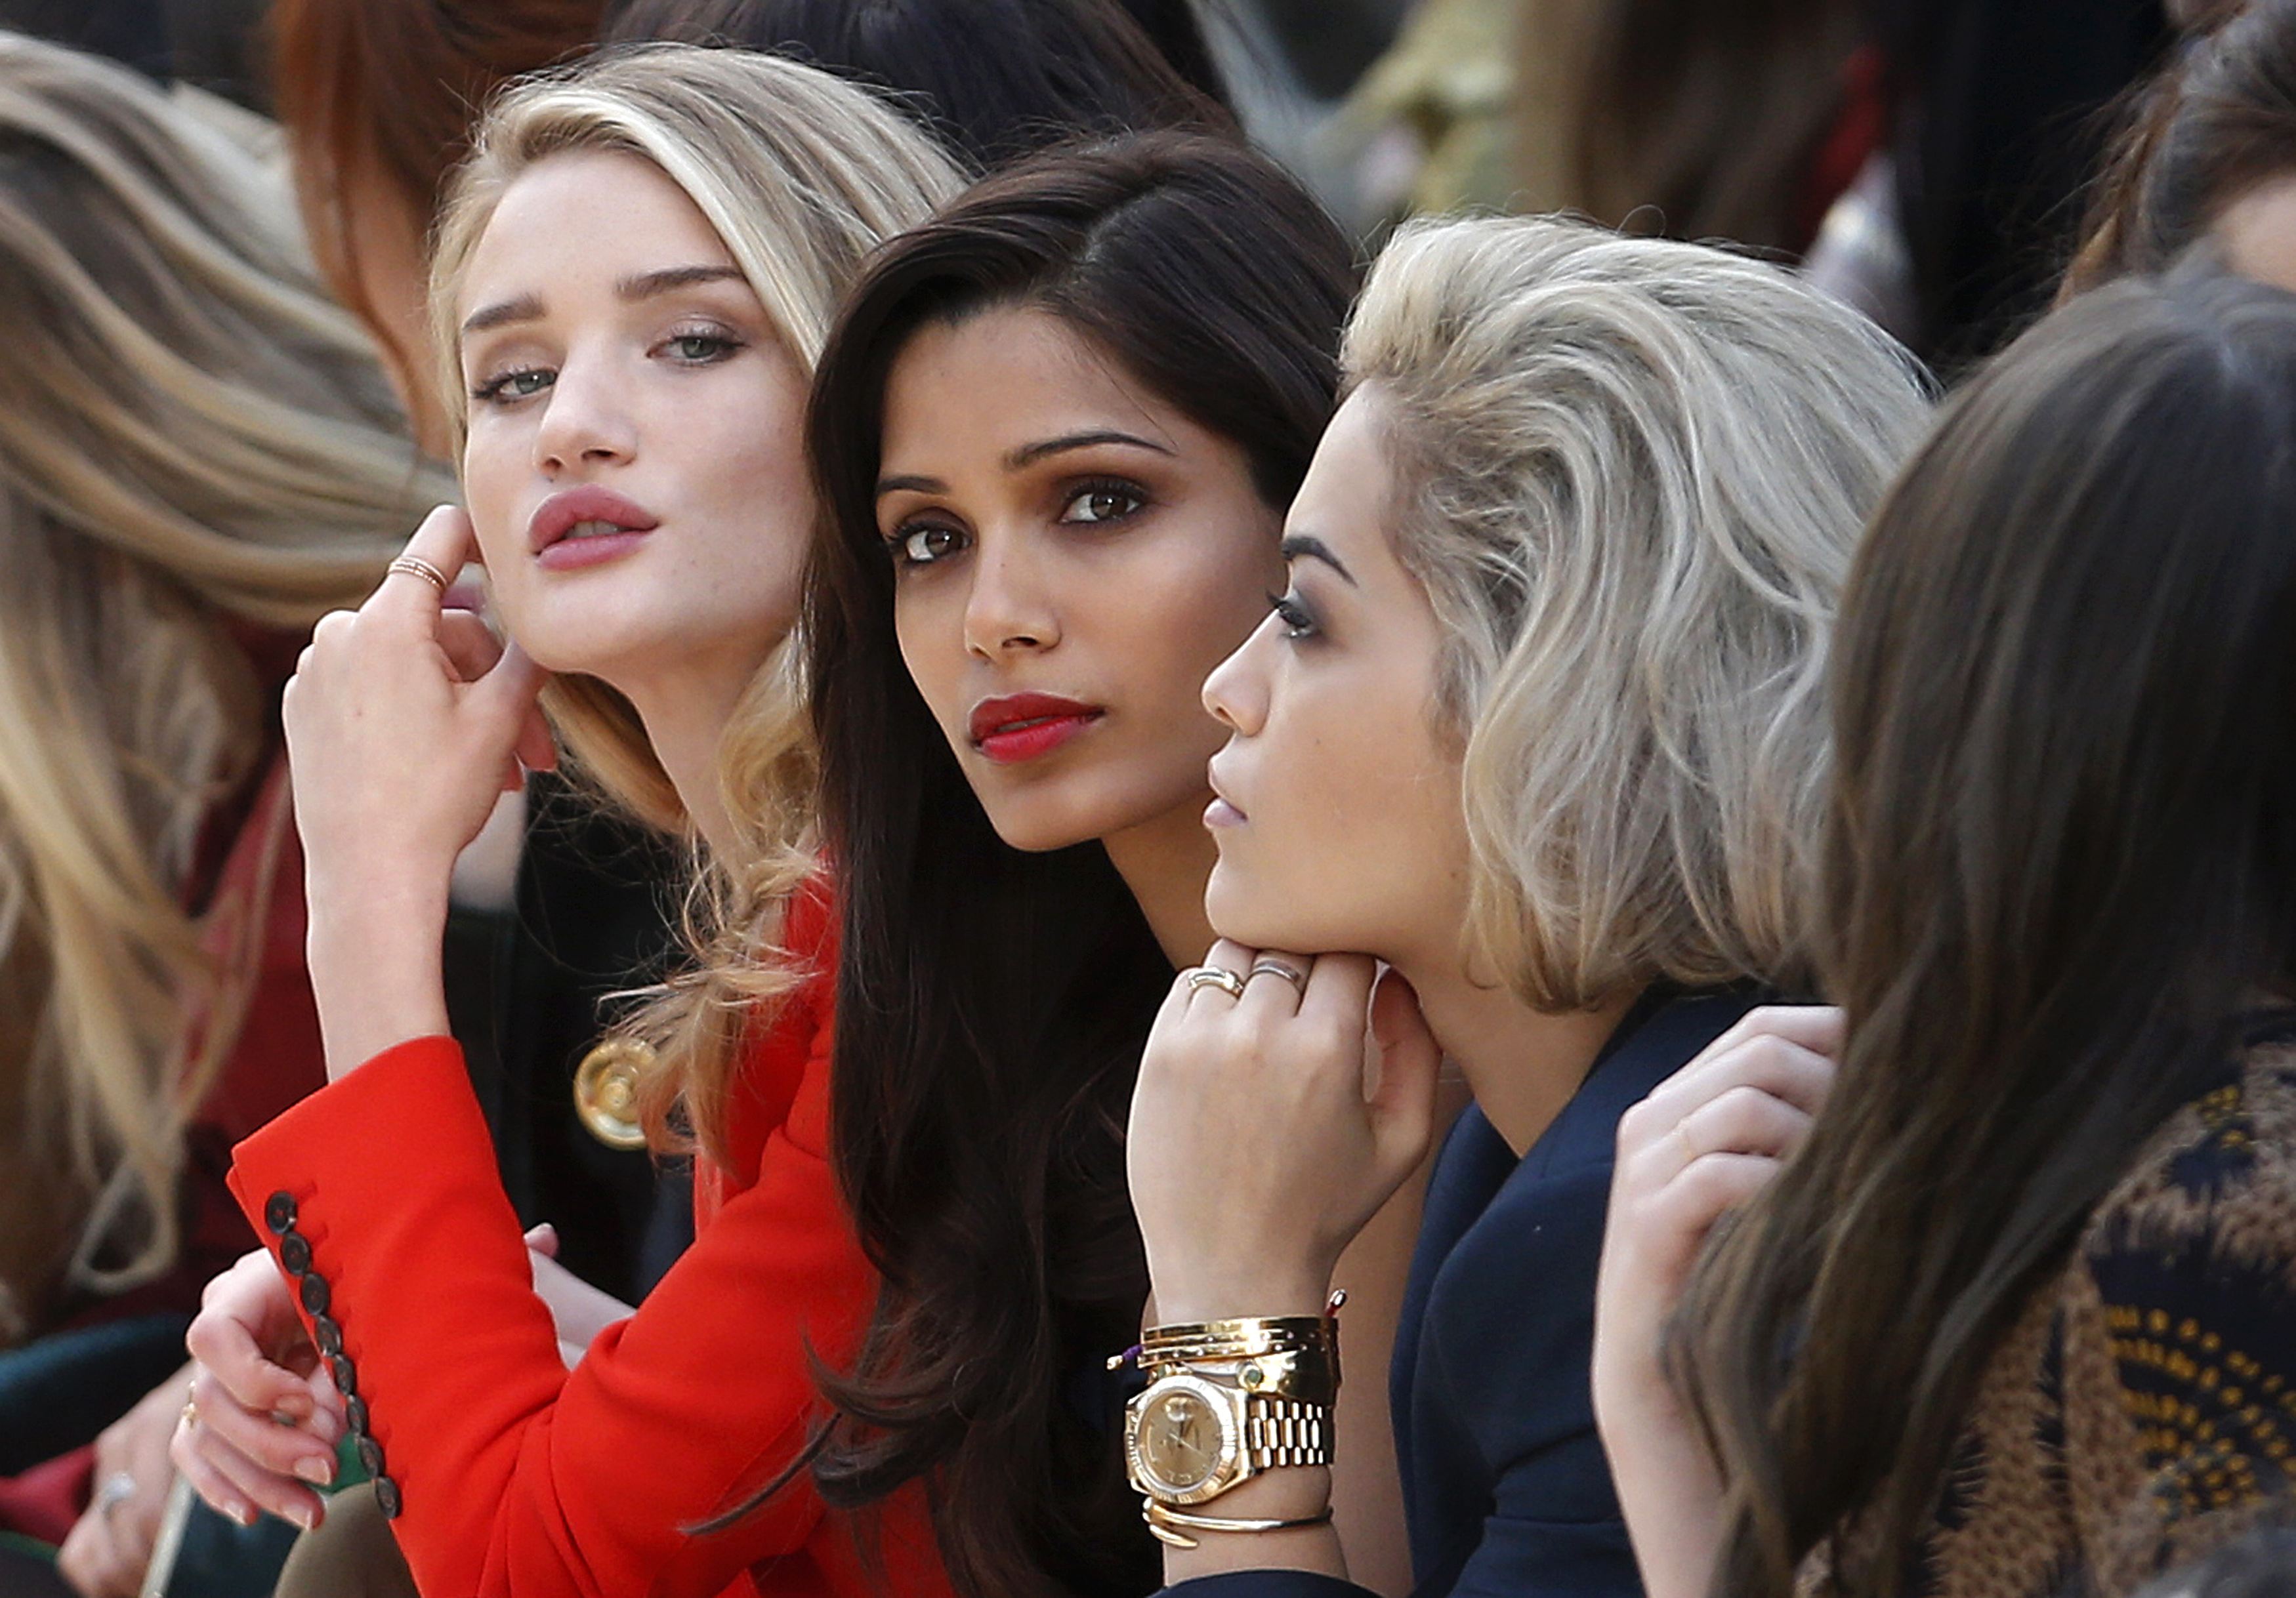 Model and actress Rosie Huntington-Whiteley, actress Freida Pinto and singer Rita Ora watch the presentation of the Burberry Prorsum Autumn/Winter 2013 collection during London Fashion Week